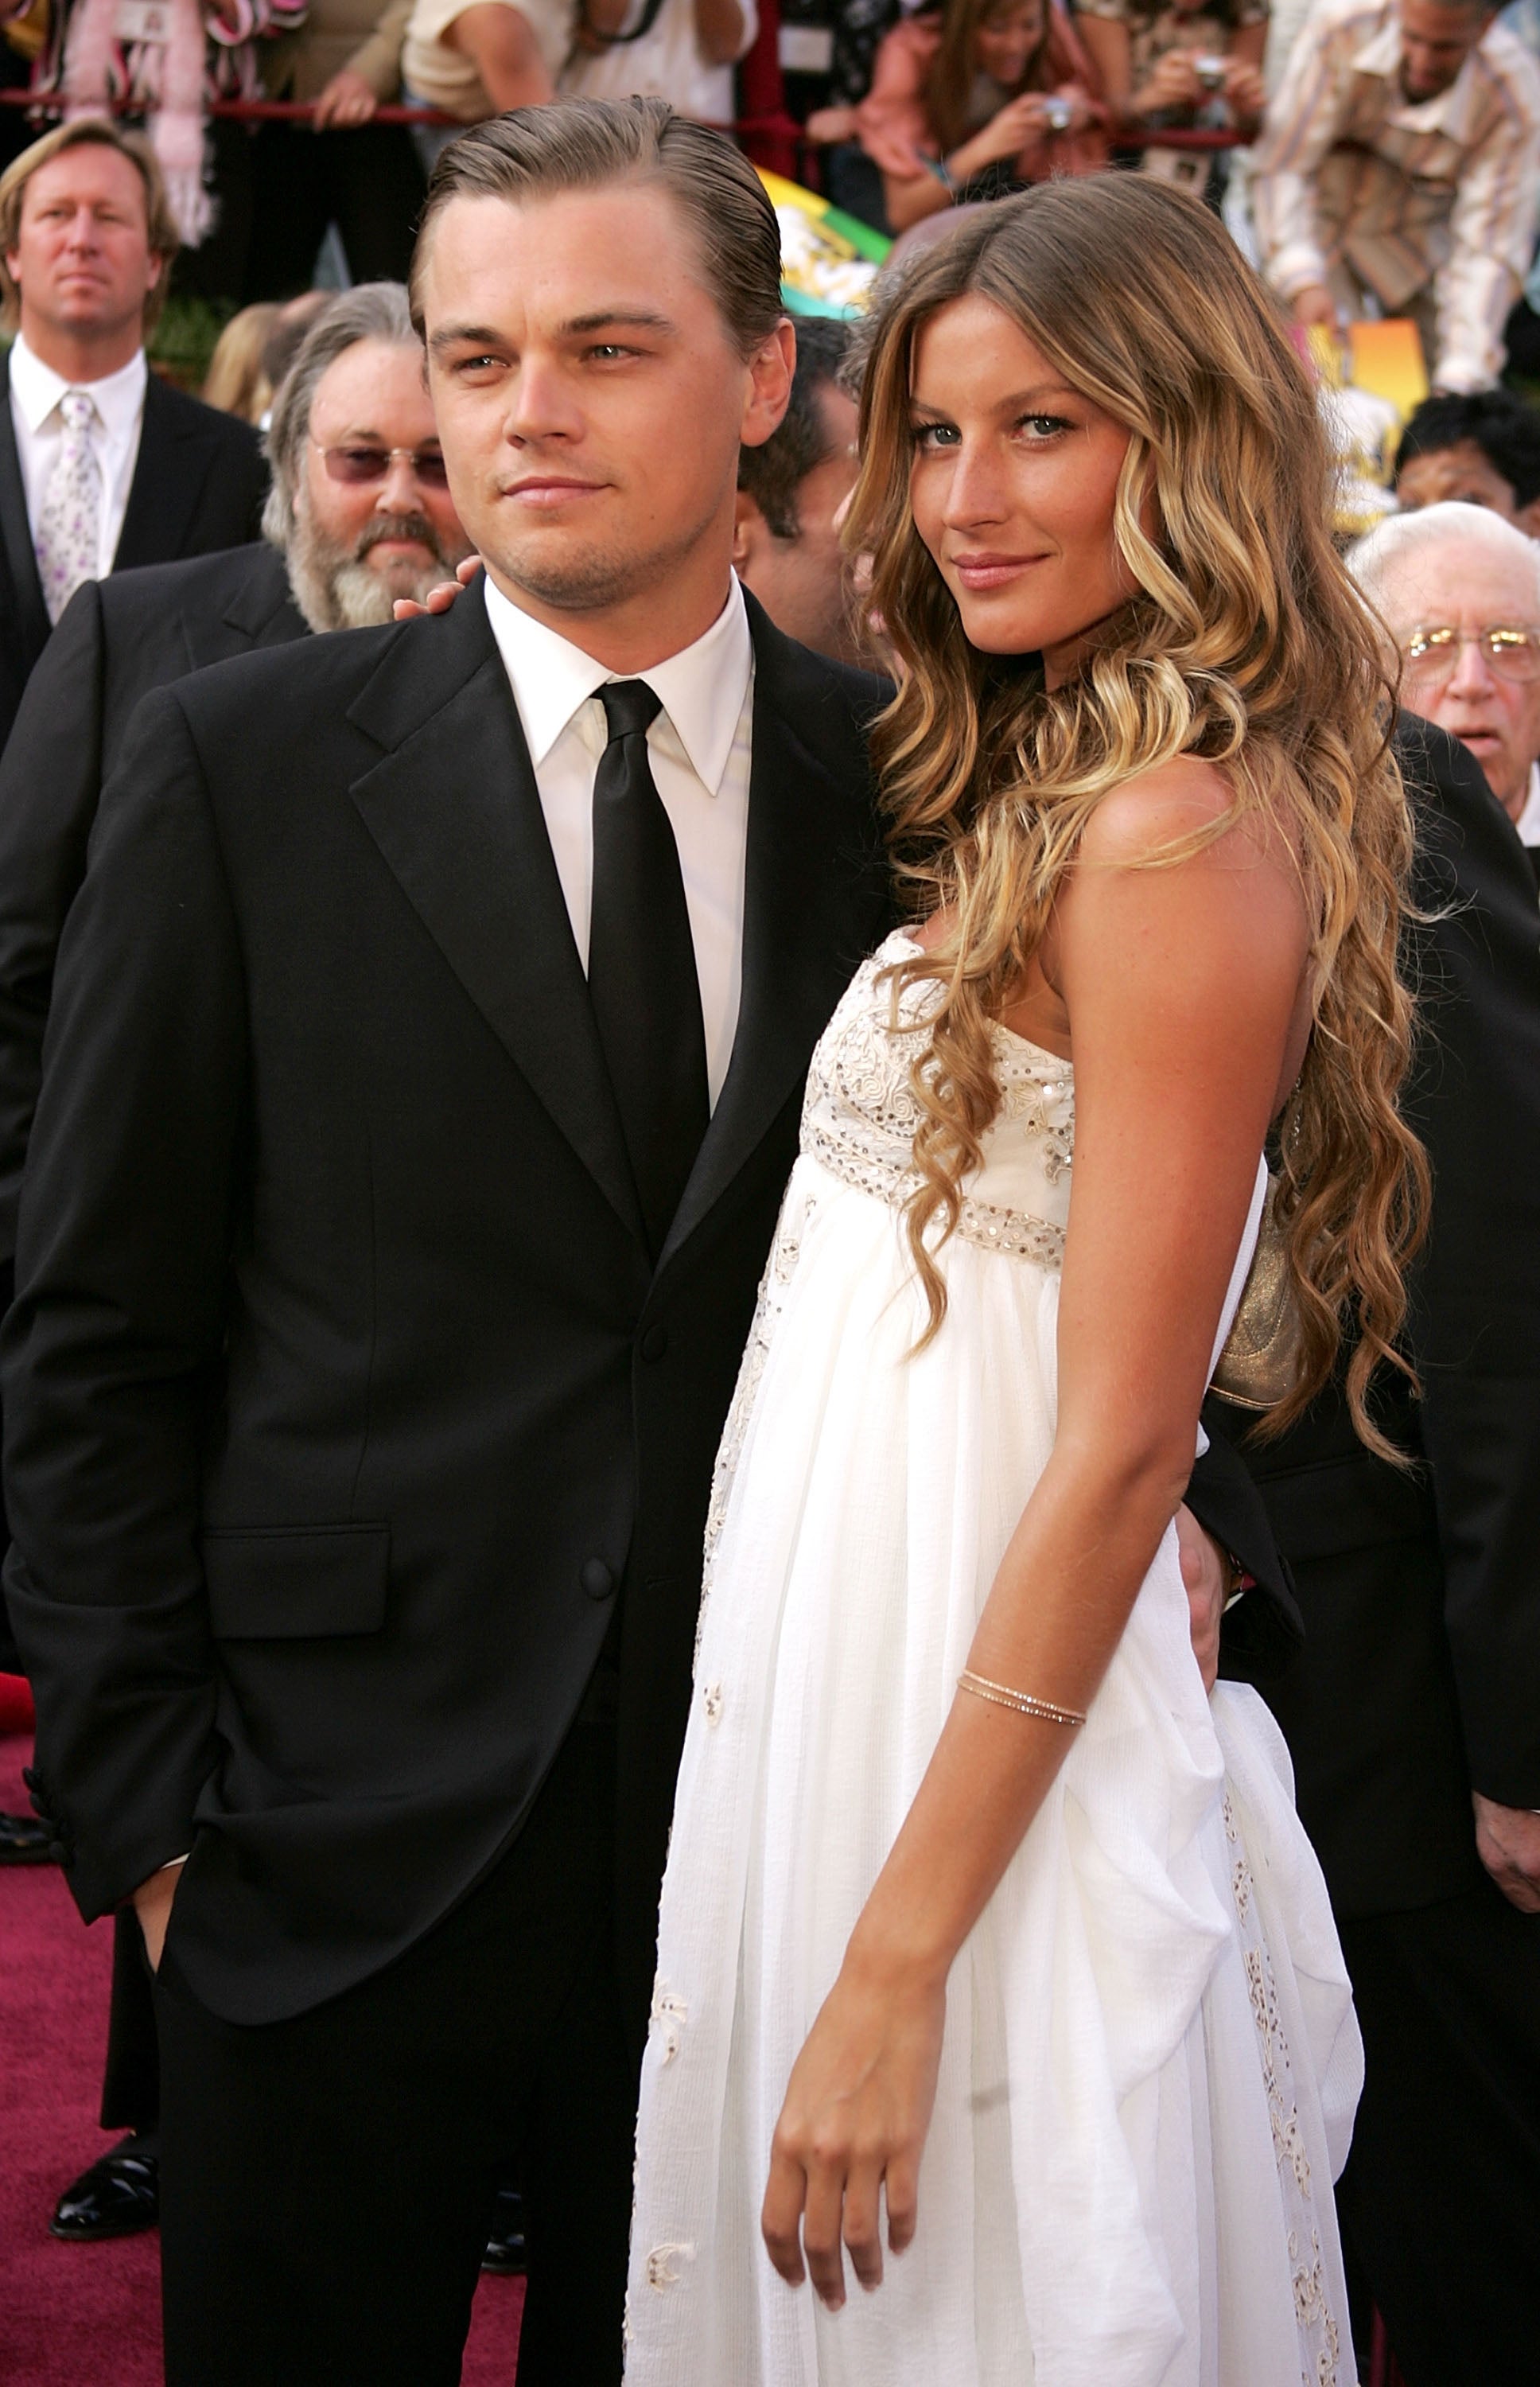 Leonardo DiCaprio first started dating model Gisele Bündchen when she was 18 and he was 24